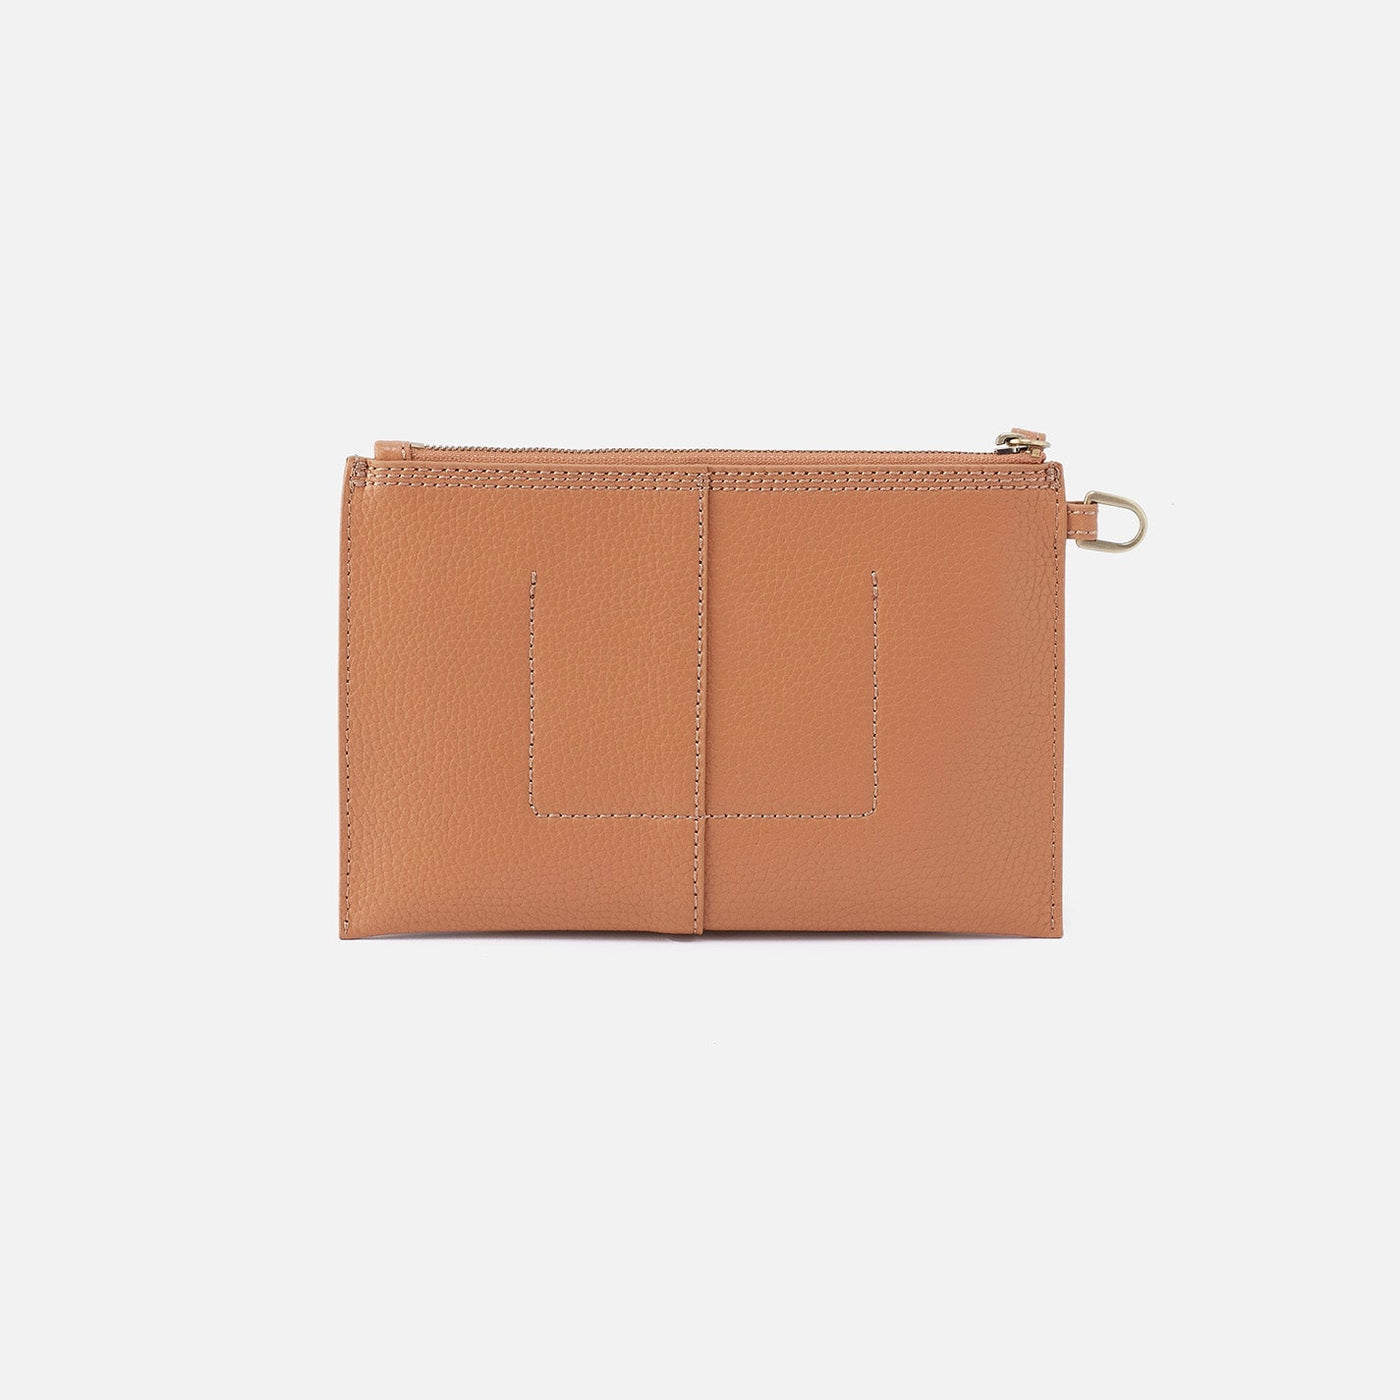 VIDA SMALL POUCH - BISCUIT